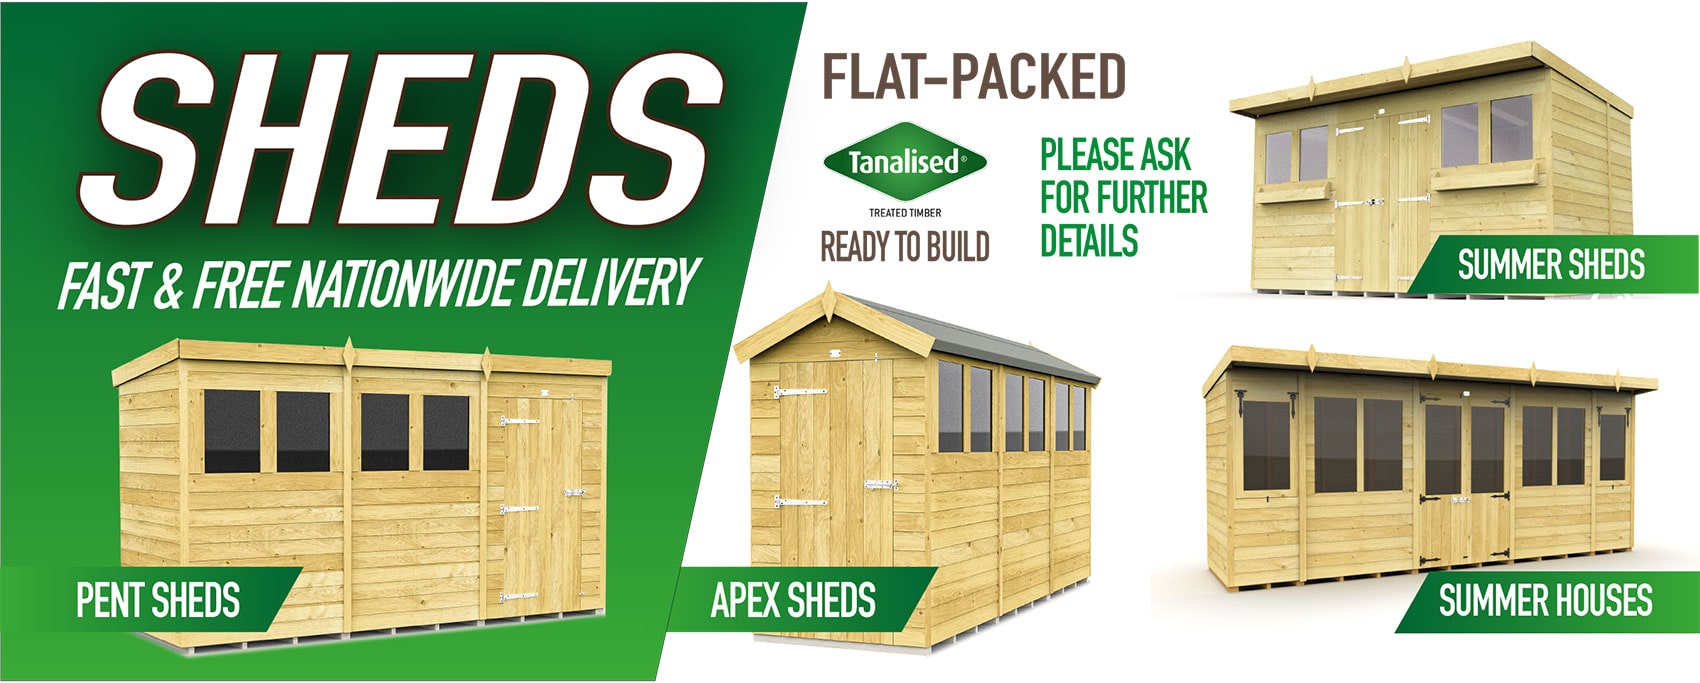 Flat Packed Sheds